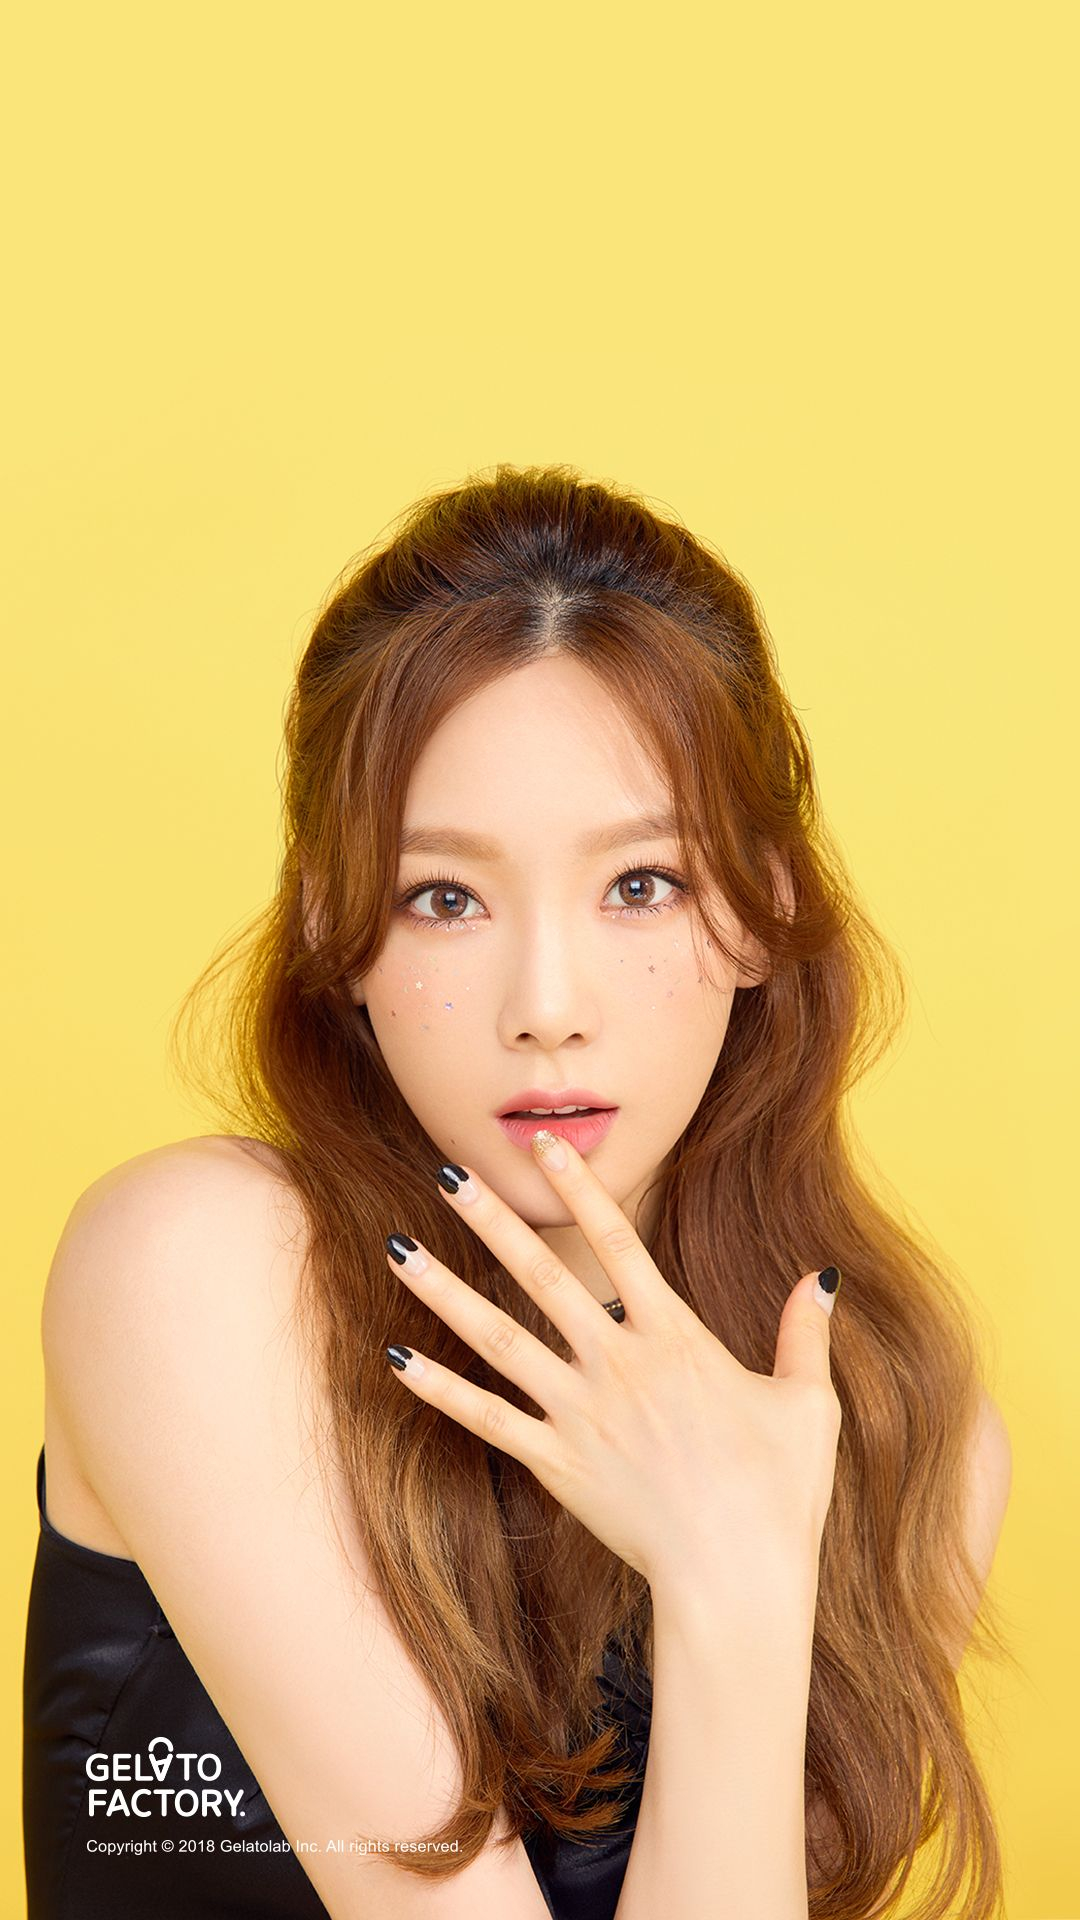 1080x1920 Pin by Frida Andersson on SNSD + Jessica | Taeyeon fashion, Girls' generation taeyeon, Girls generati